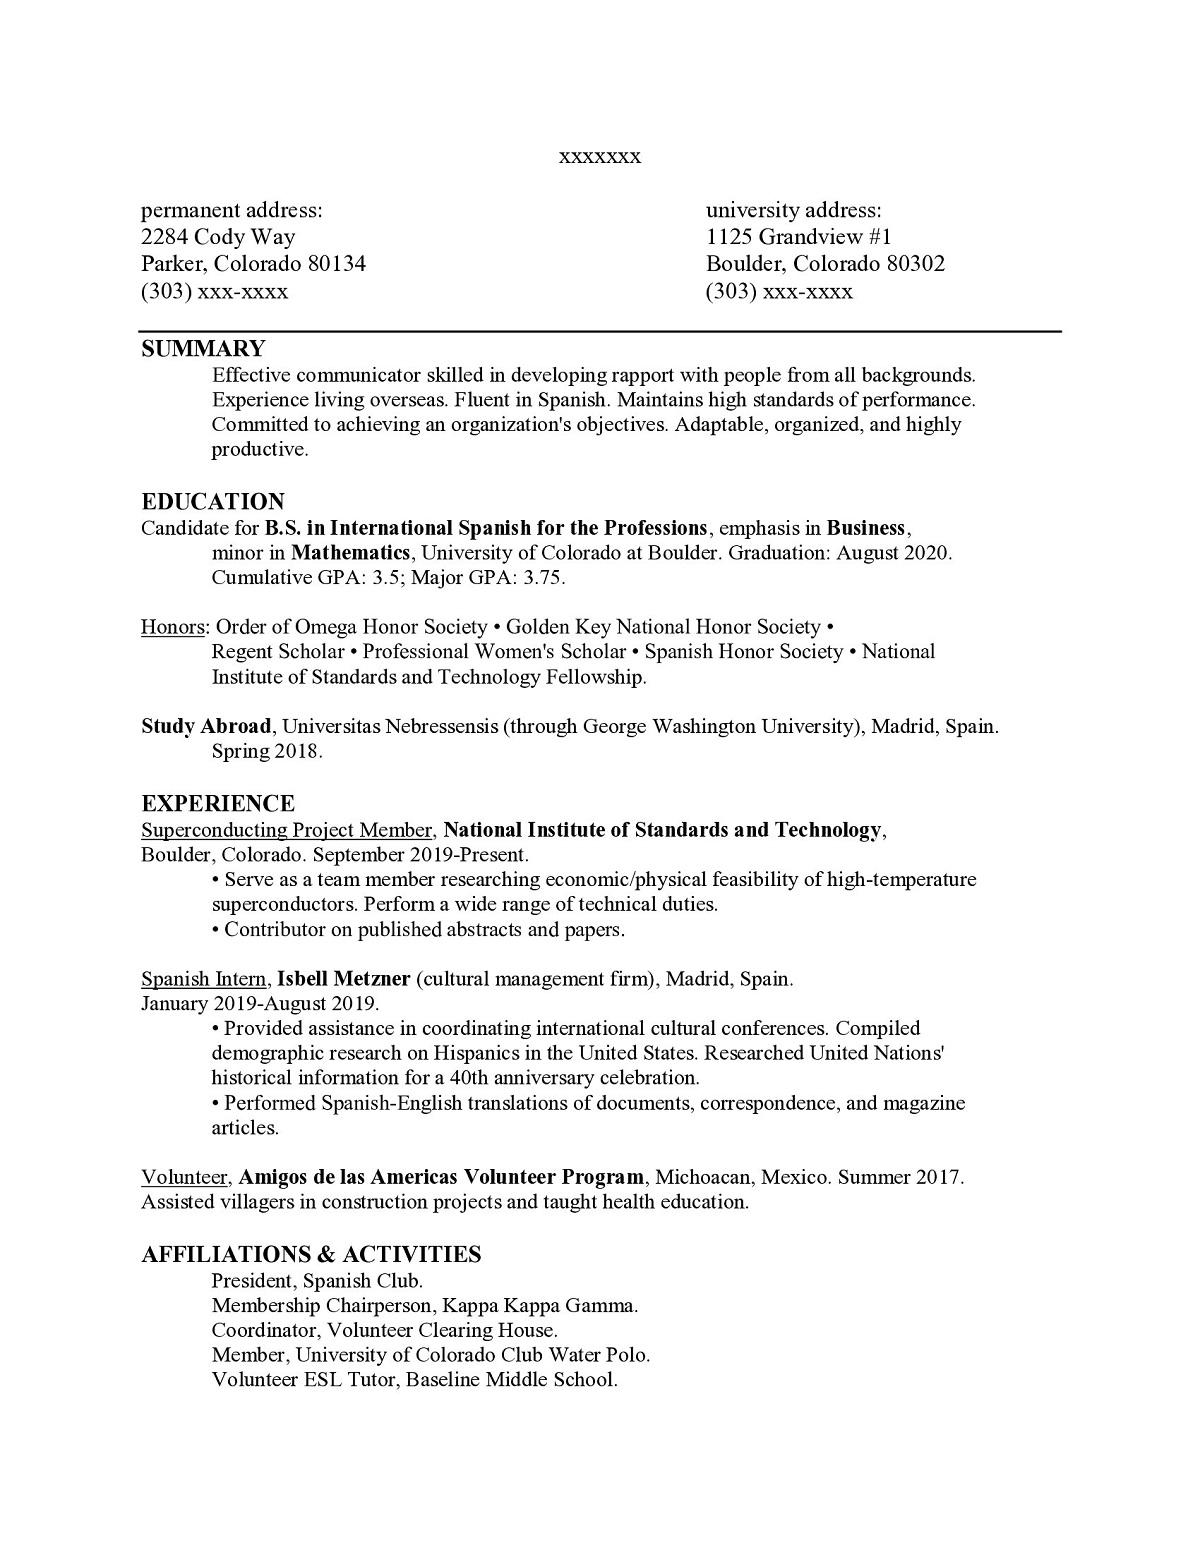 Sample resume: Foreign Languages, Entry Level, Chronological